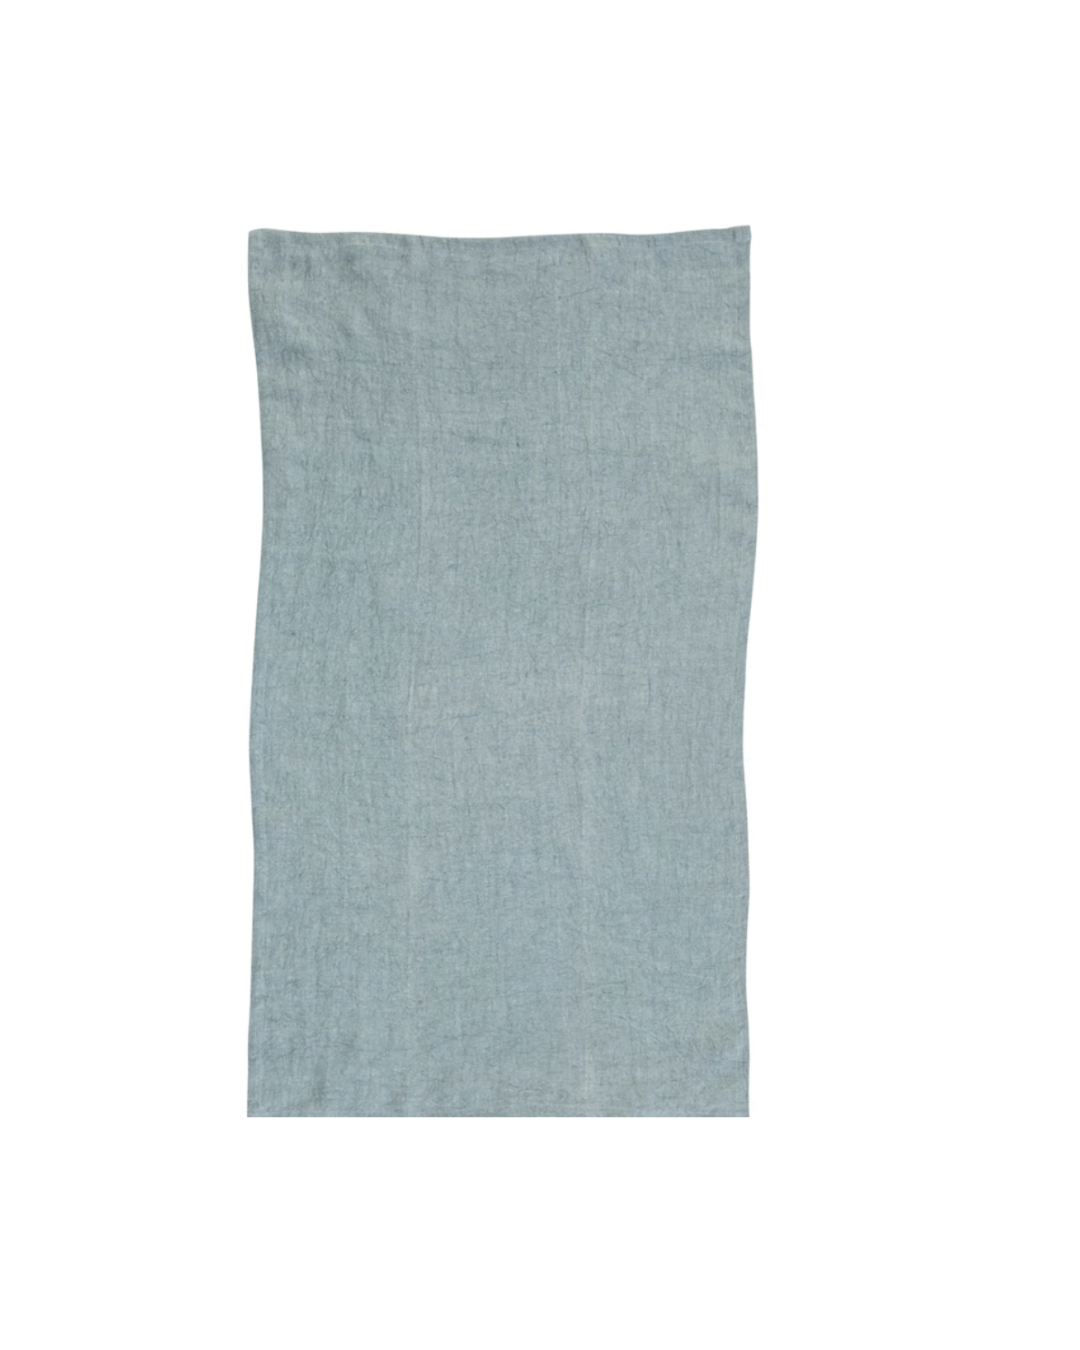 A Linen Tea Towel Sea displayed on a white background in a Scottsdale Arizona bungalow. (brand: Creative Co-op)